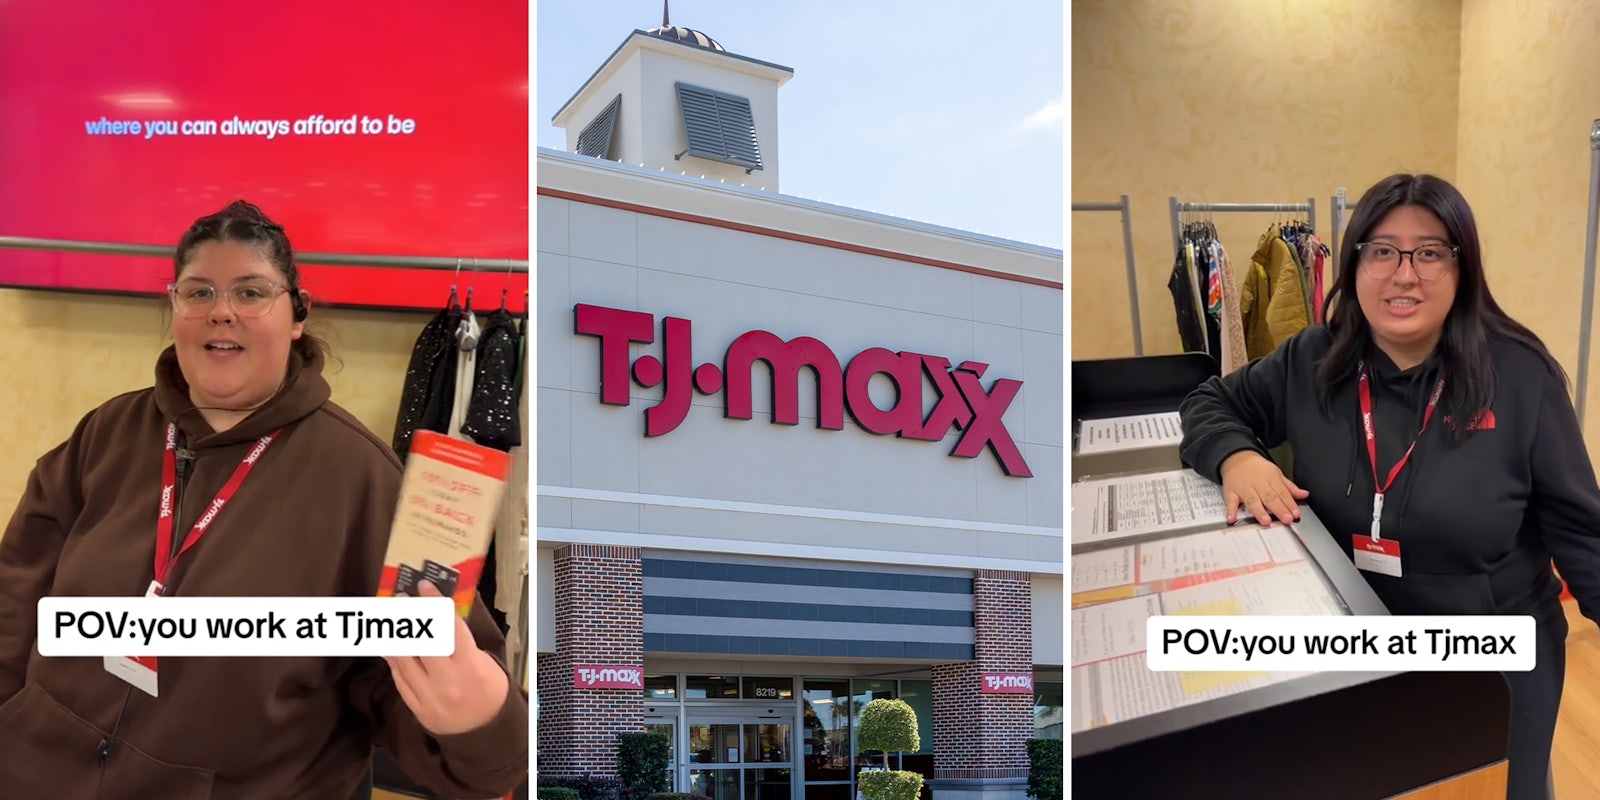 TJ Maxx workers admit to hiding the viral items for themselves